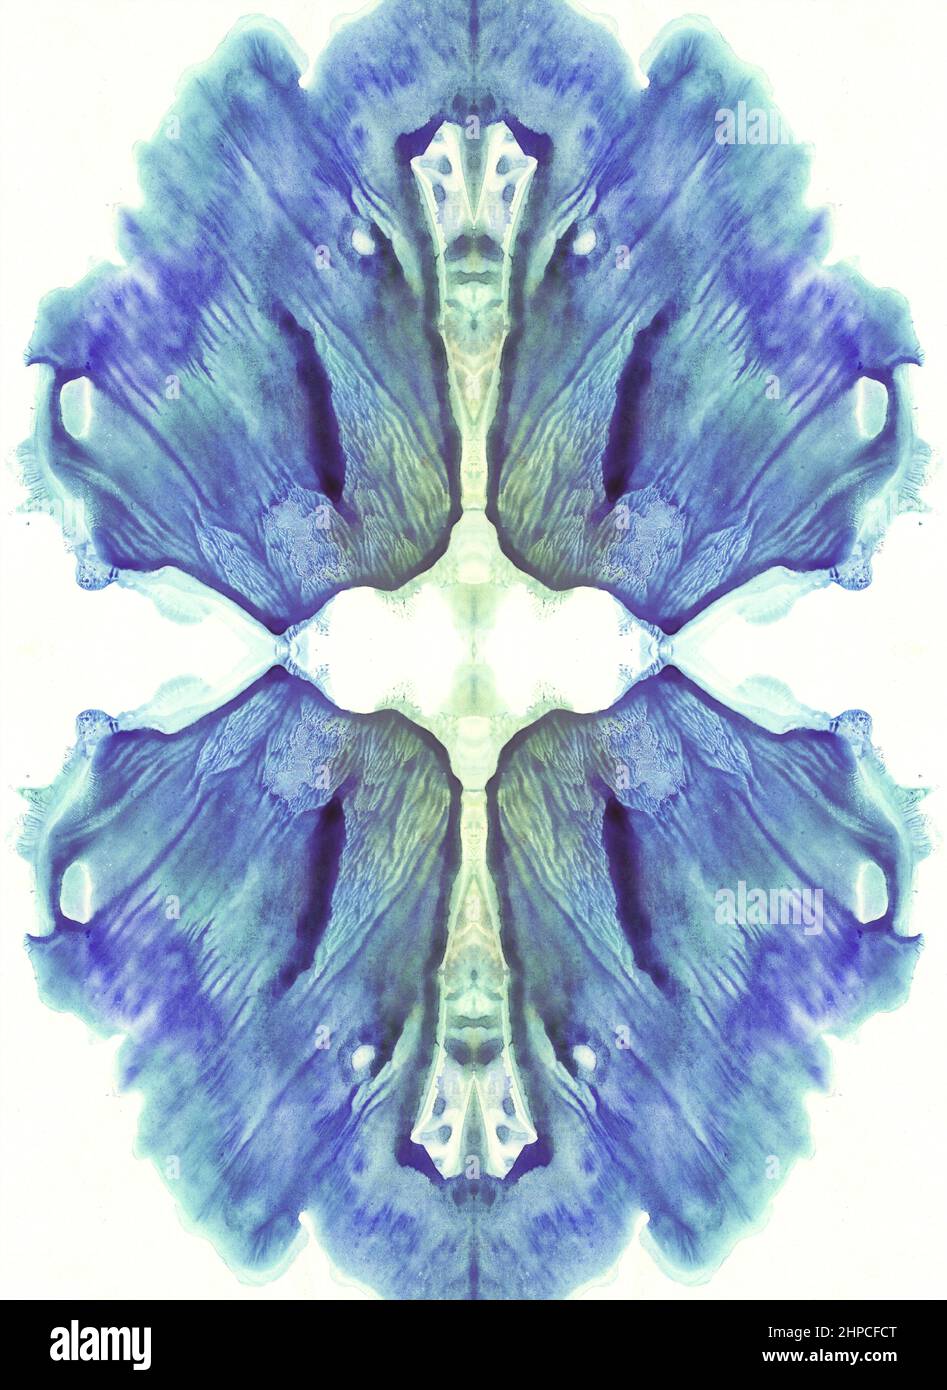 Abstract blue symmetric watercolor painting. Artistic background. Stock Photo